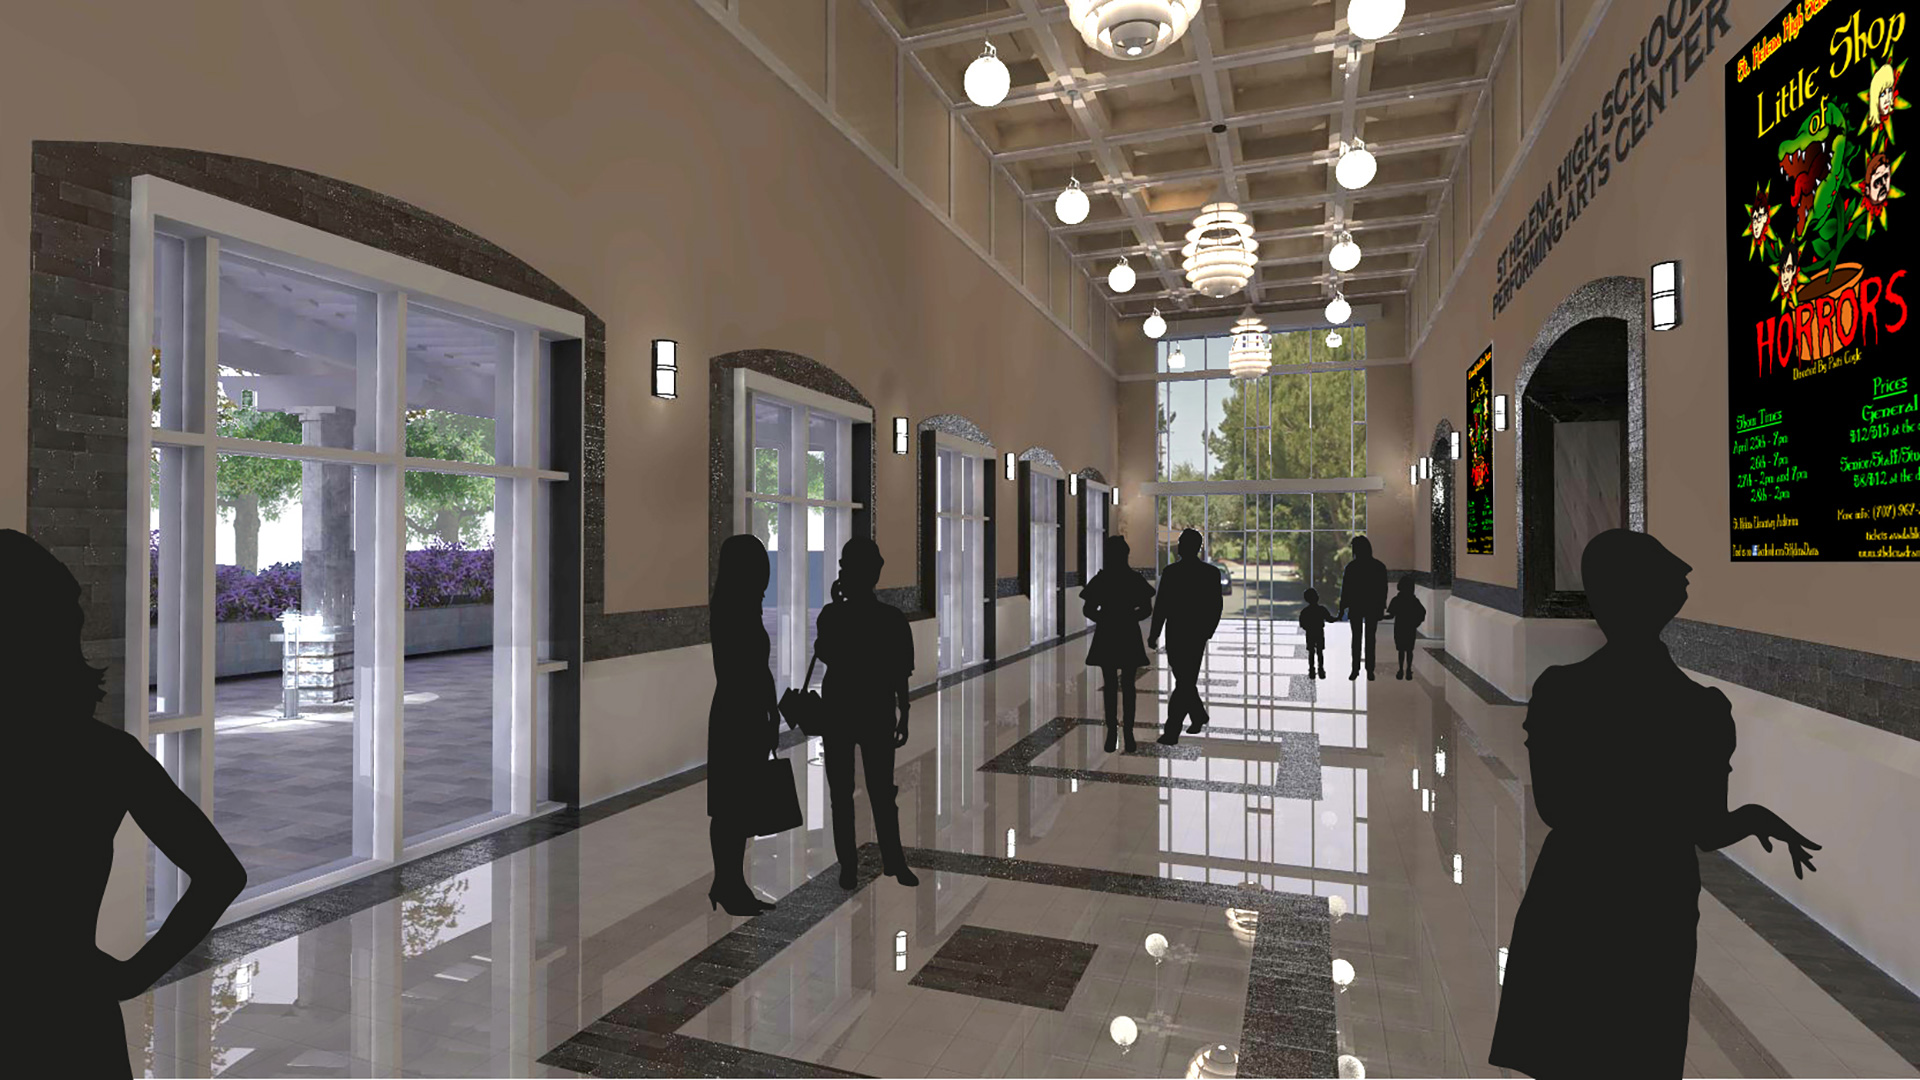 Rendering of conceptual foyer and box office, closely resembling final built foyer.